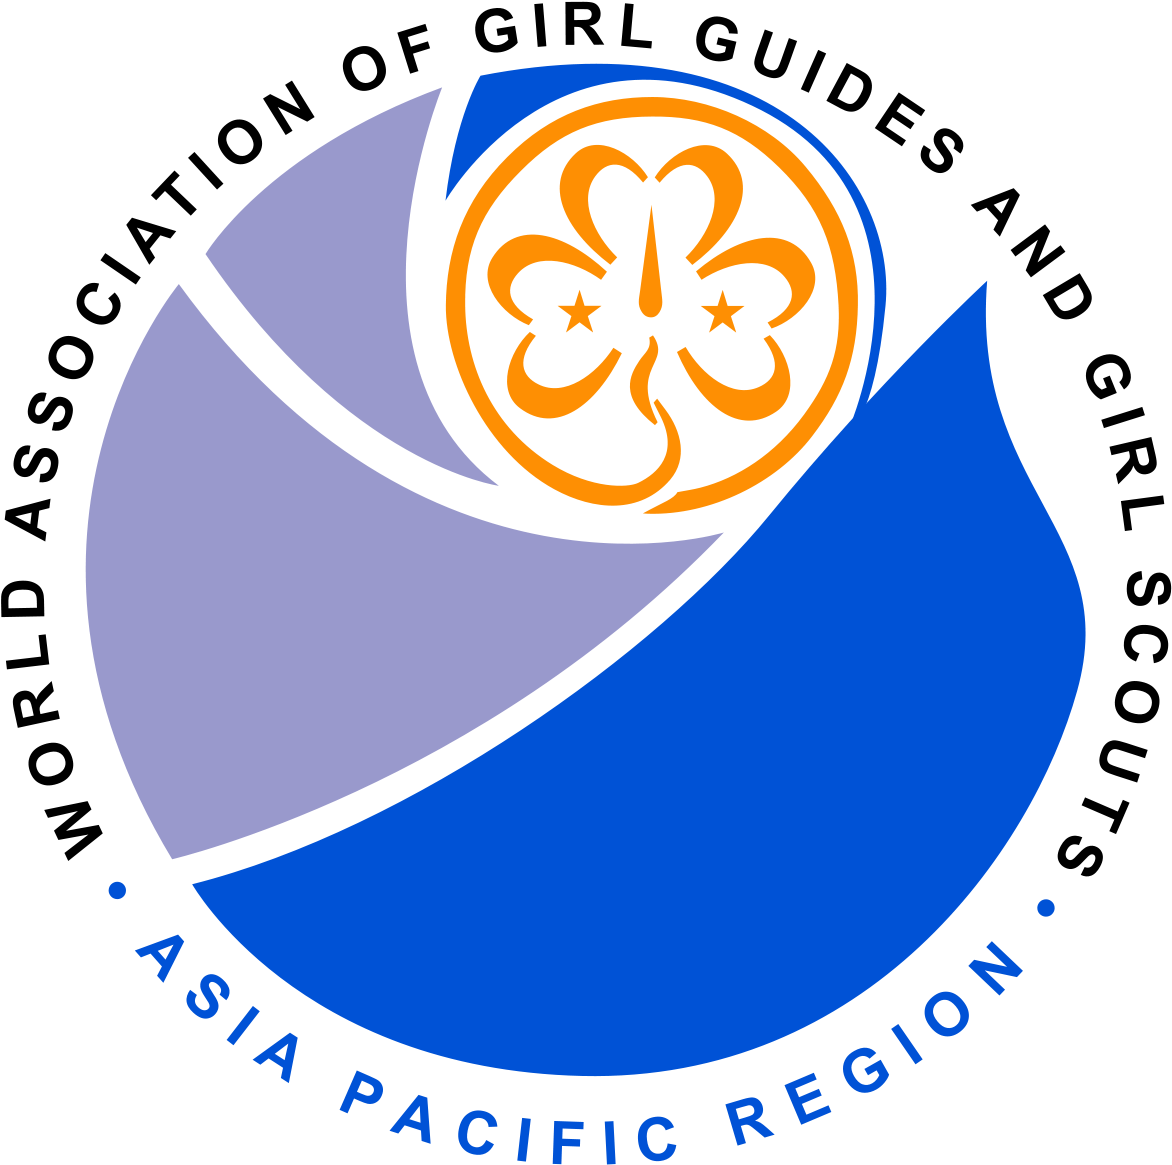 Girl Scouts Photo - Asia Pacific Region Girl Guides (1200x1187)